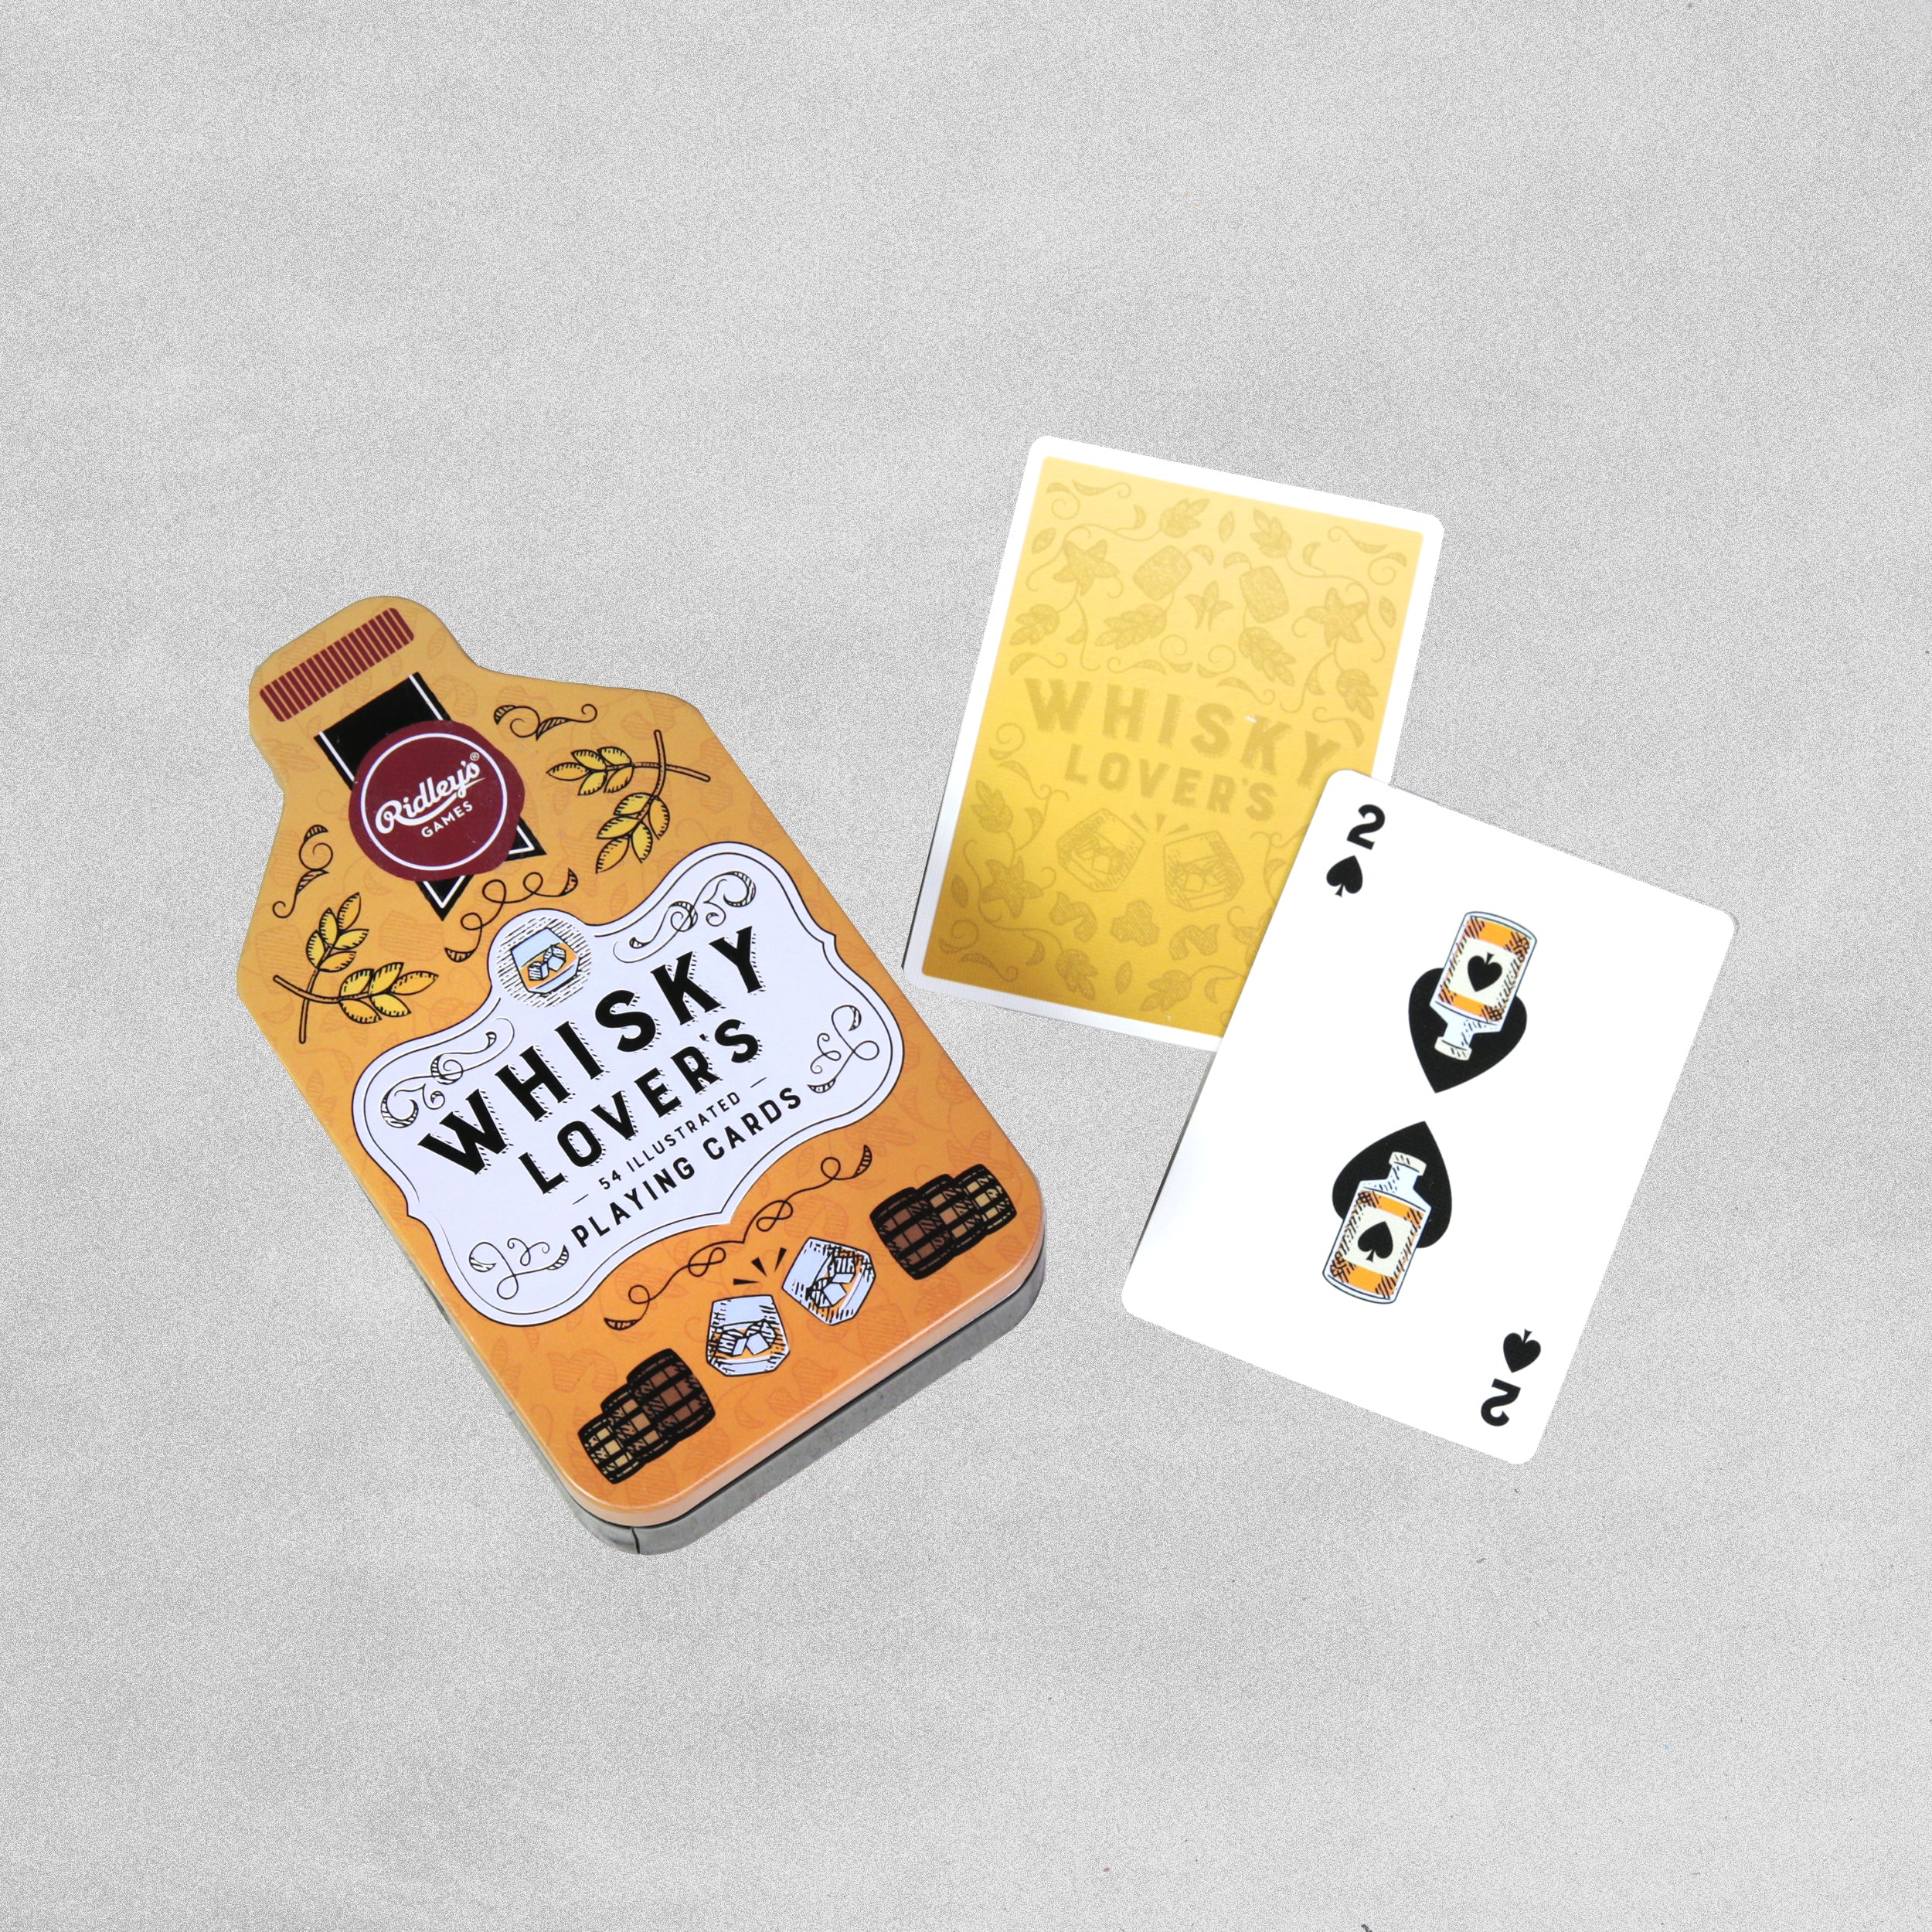 Whiskey Lover's - Illustrated Playing Cards